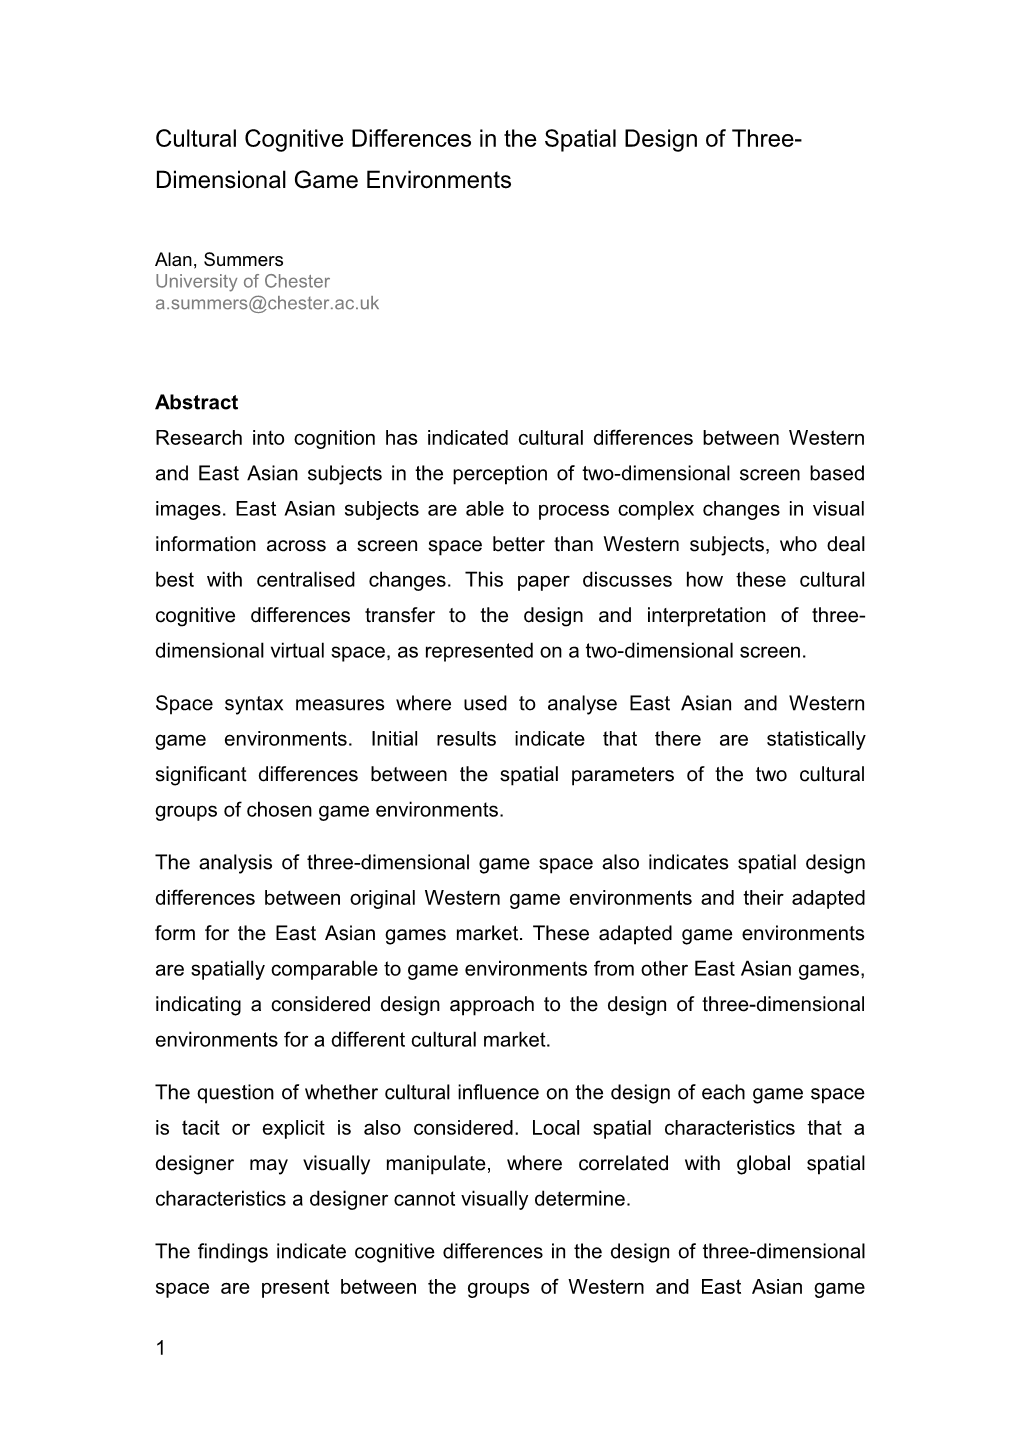 Cultural Cognitive Differences in the Spatial Design of Three-Dimensional Game Environments